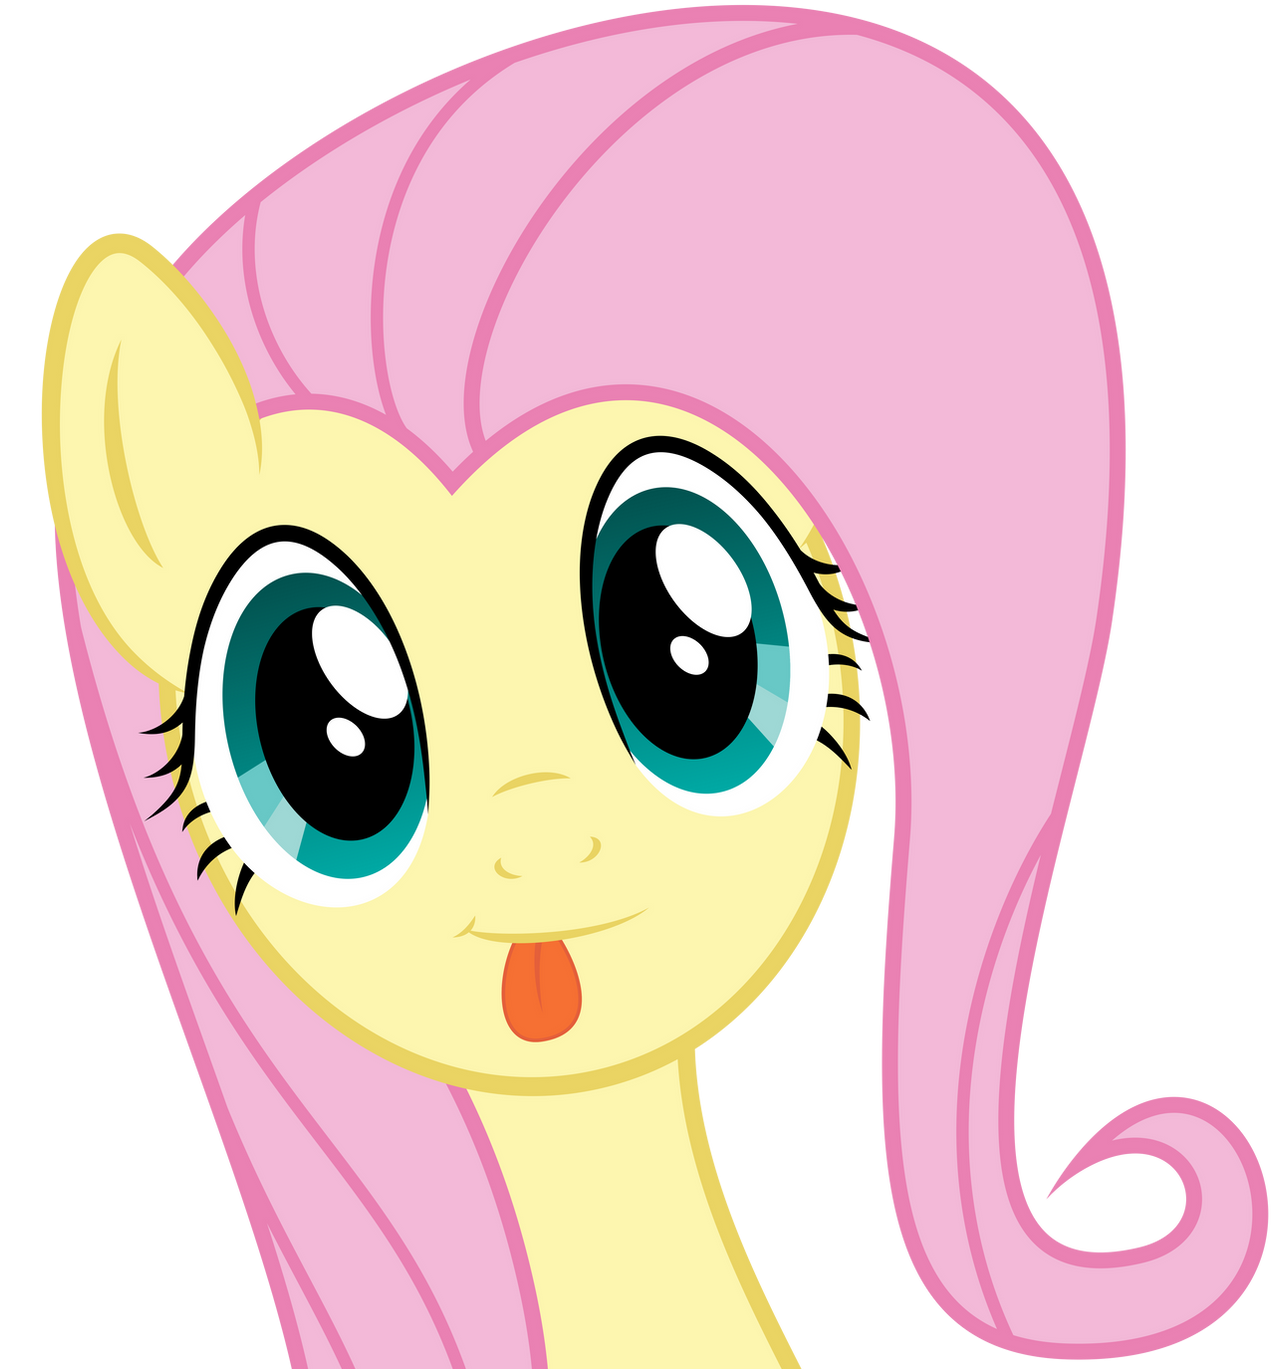 Fluttershy being cute [without Hoody]